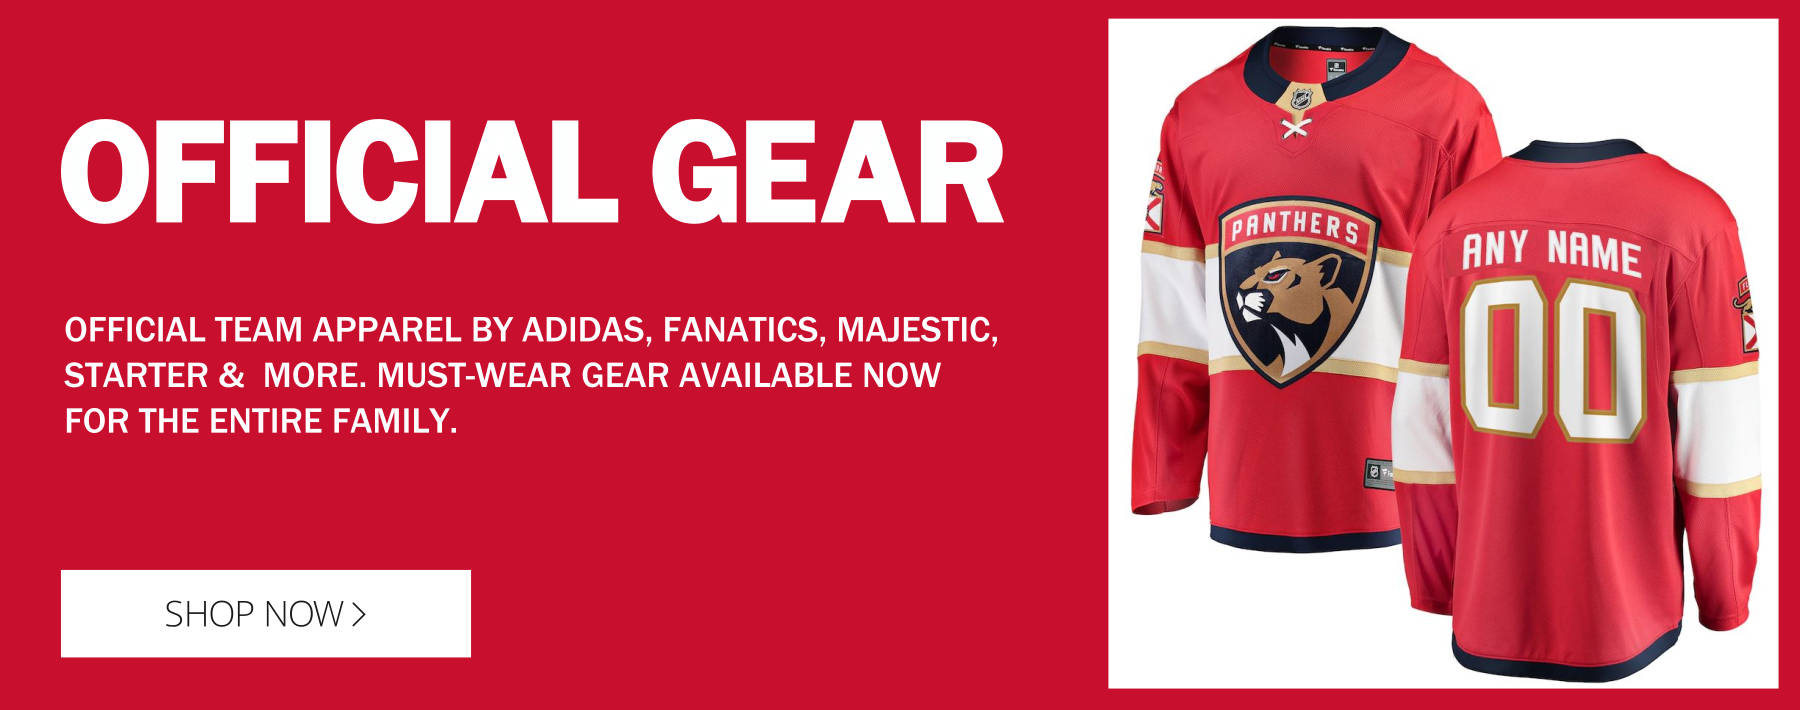 Officially Licensed Florida Panthers Gear and Merchandise 